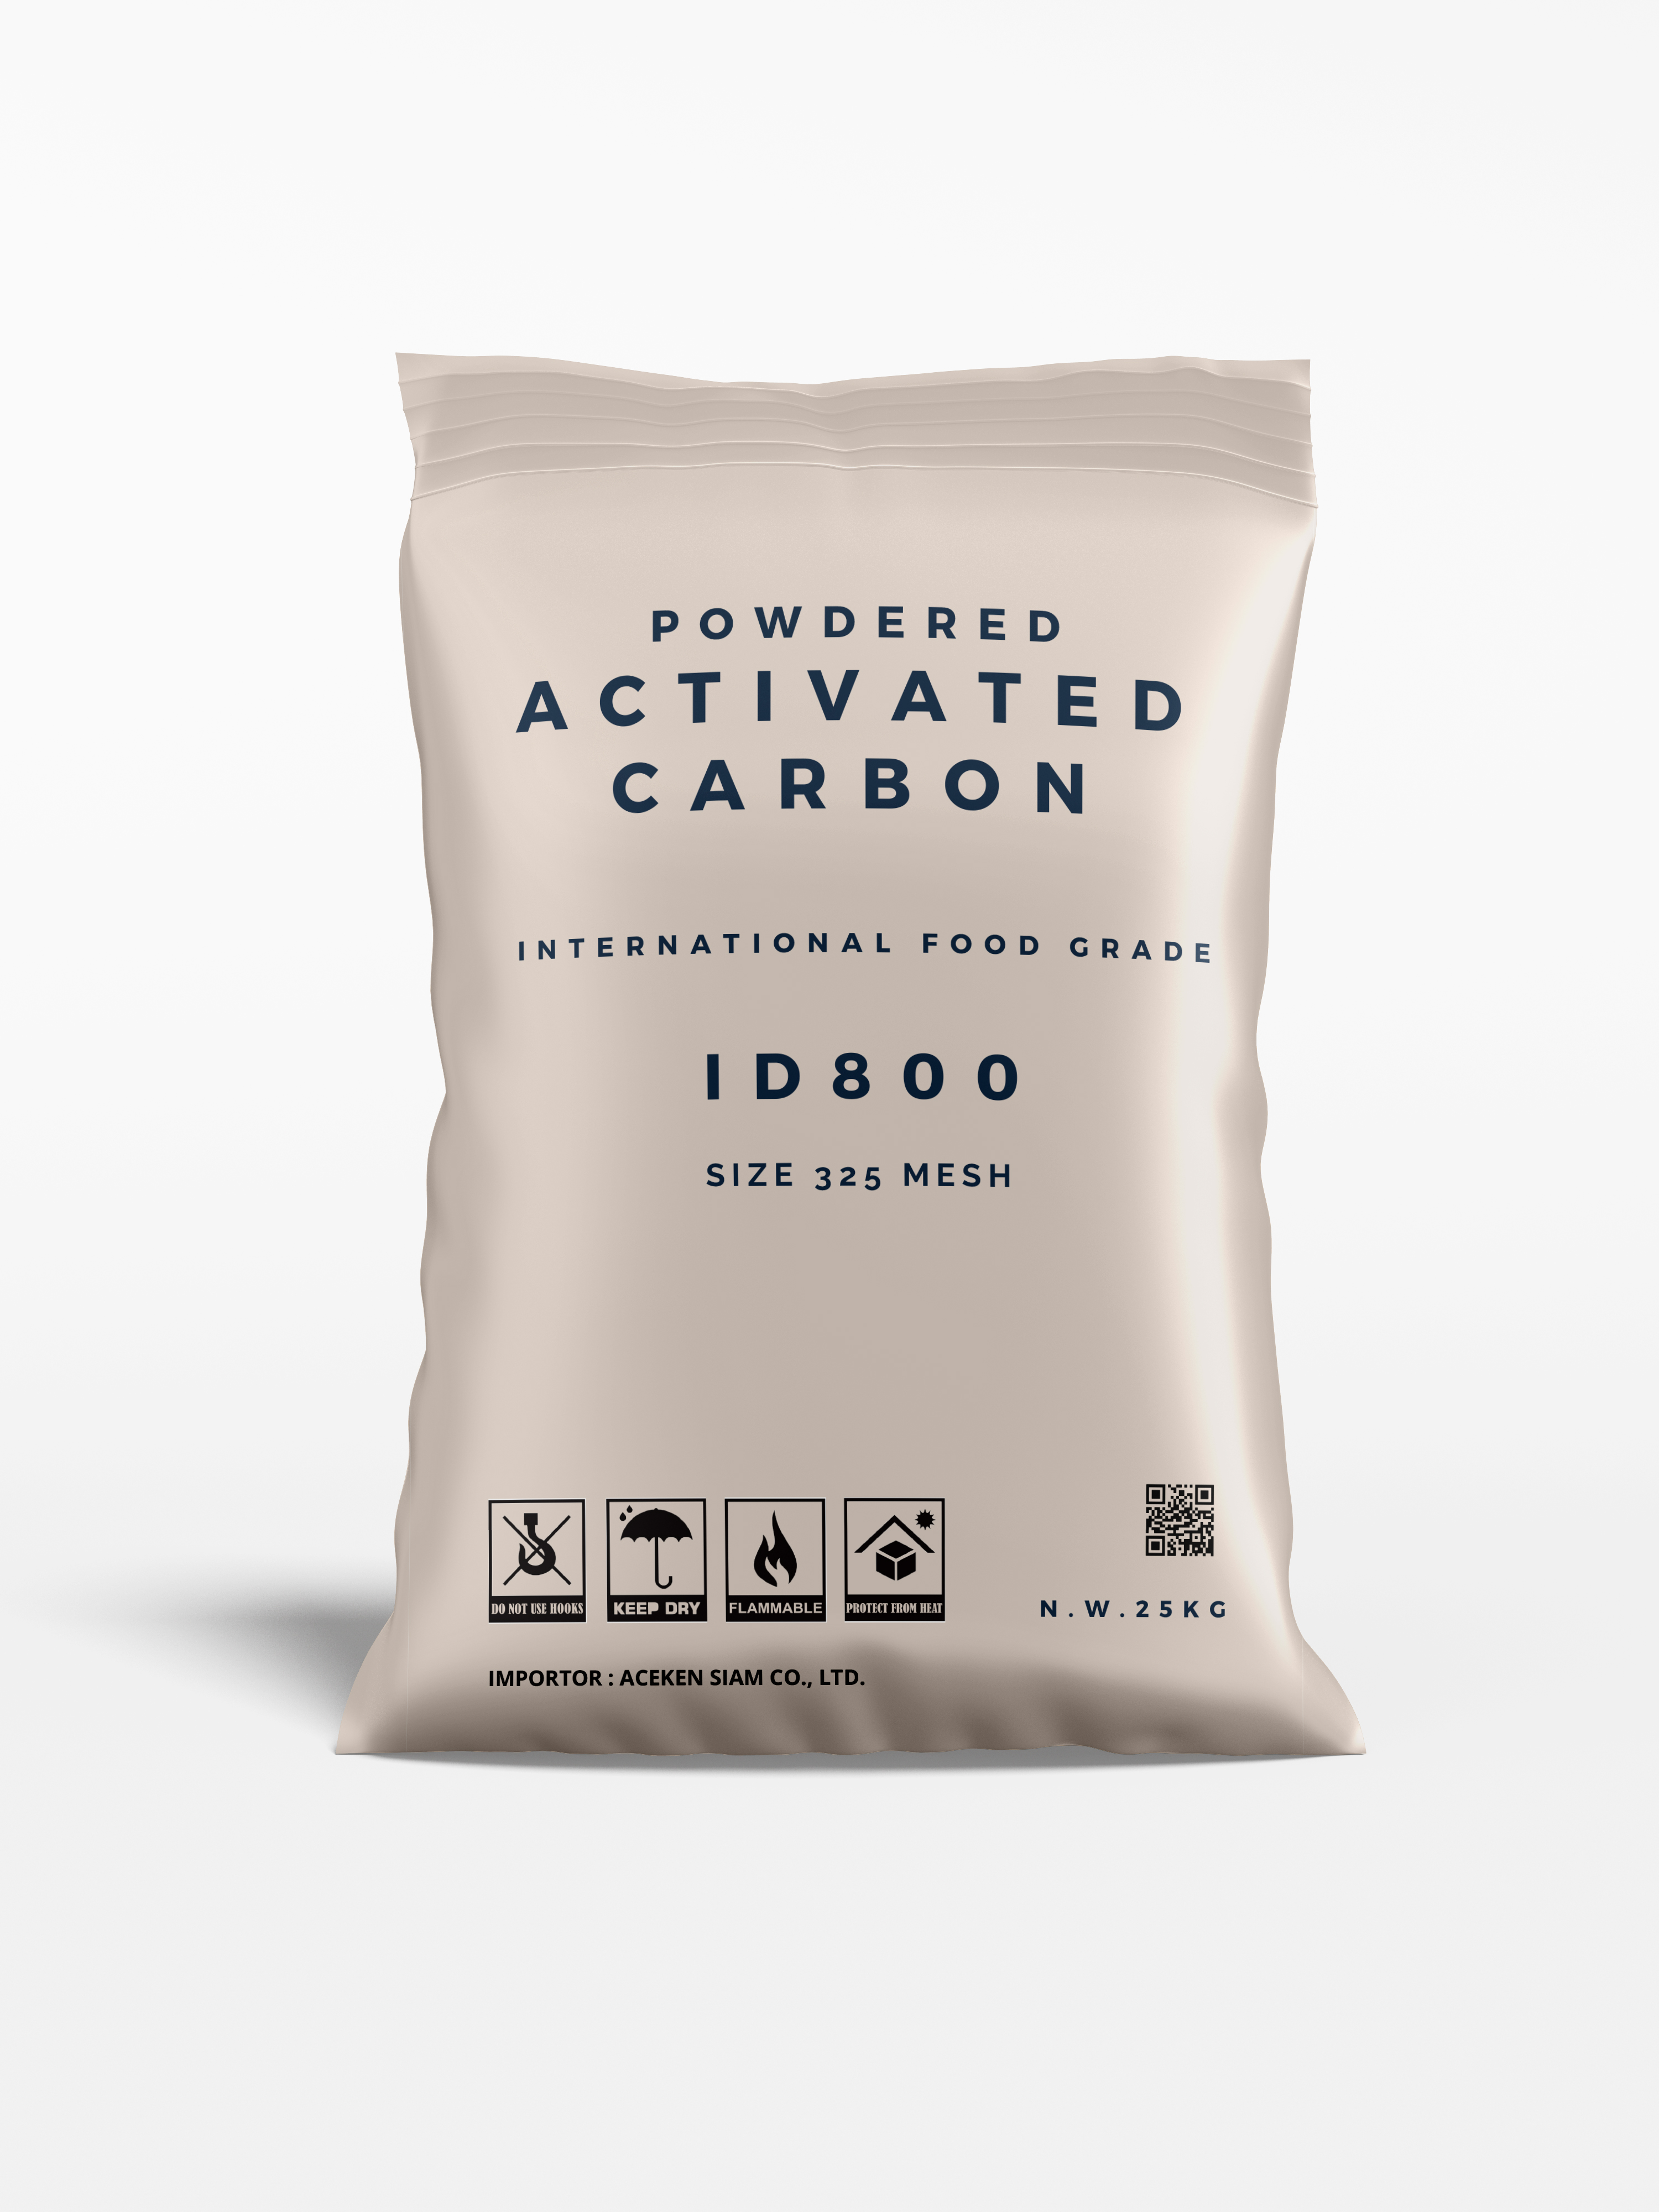 Powdered Activated Carbon ID800 size 325 mesh International Food Grade